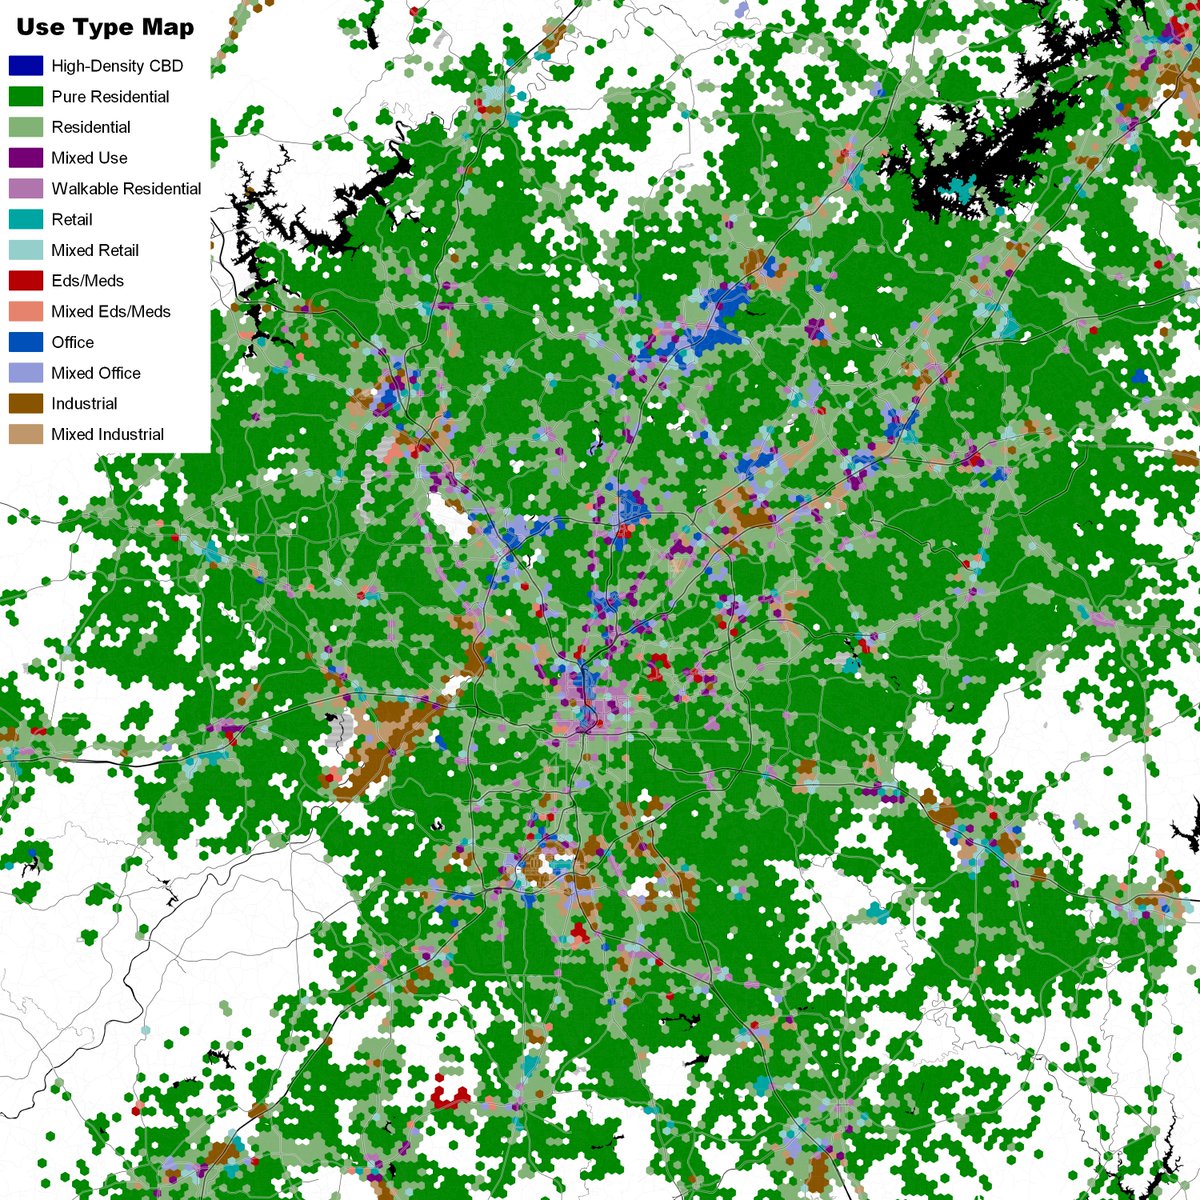 Northern Virginia's edge cities are very visible on the DC map. Now have a look at Atlanta. It's disturbing just how little "city" there is there once you limit it to reasonably dense places...but there is a decent amount of commercial density in the edge cities to the north.